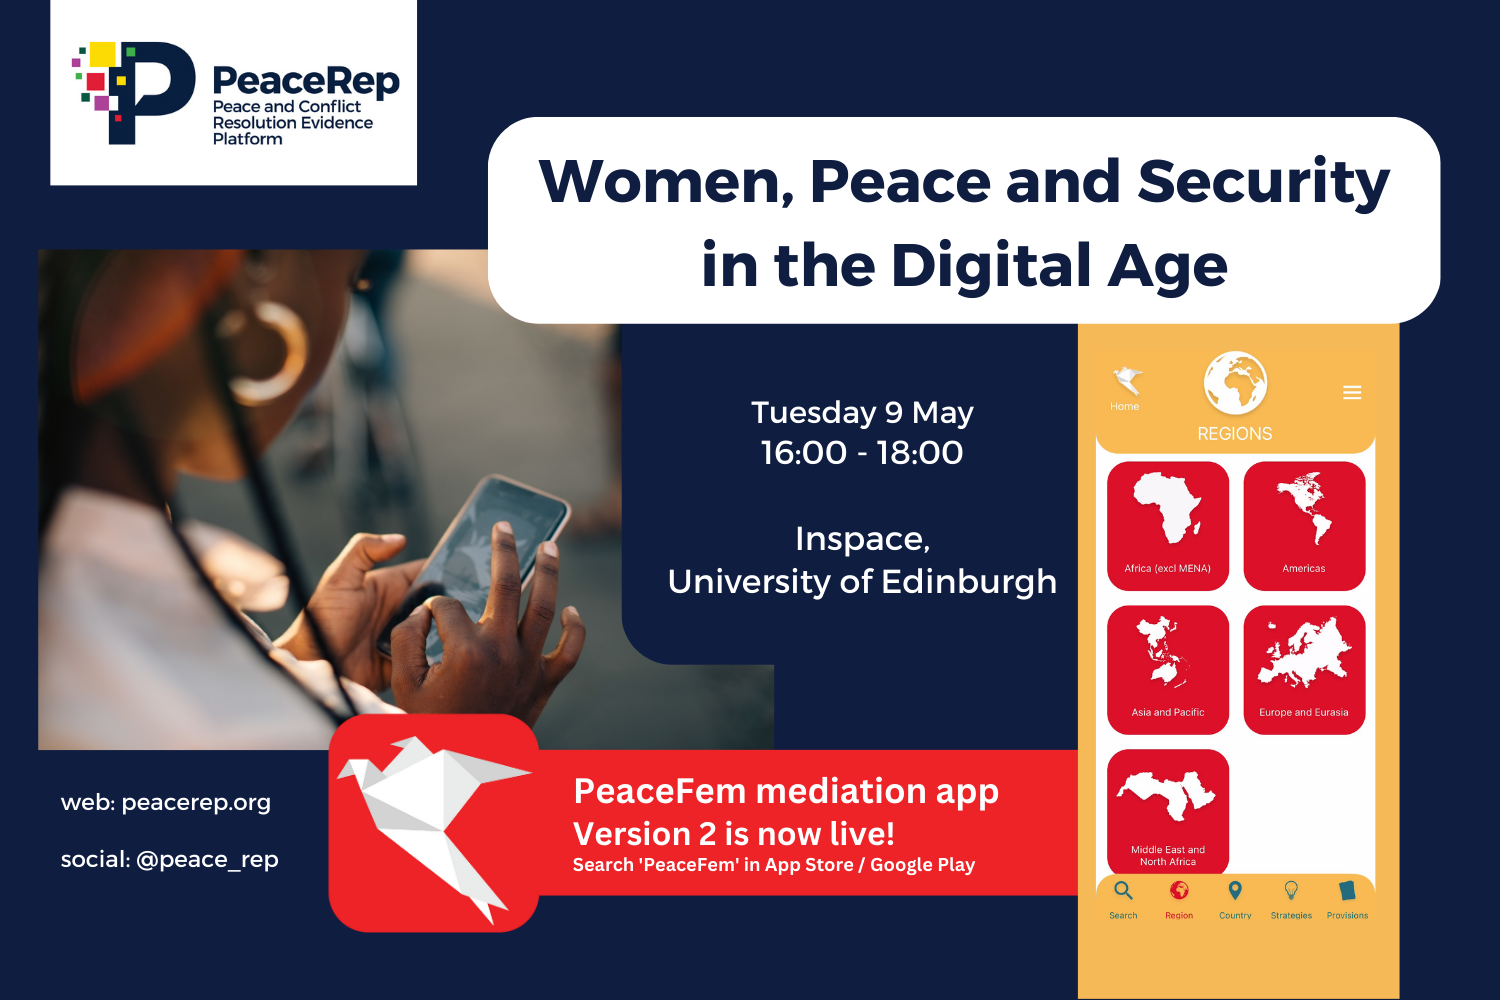 Event poster for Women, Peace and Security in the Digital Age. All event details in webpage text